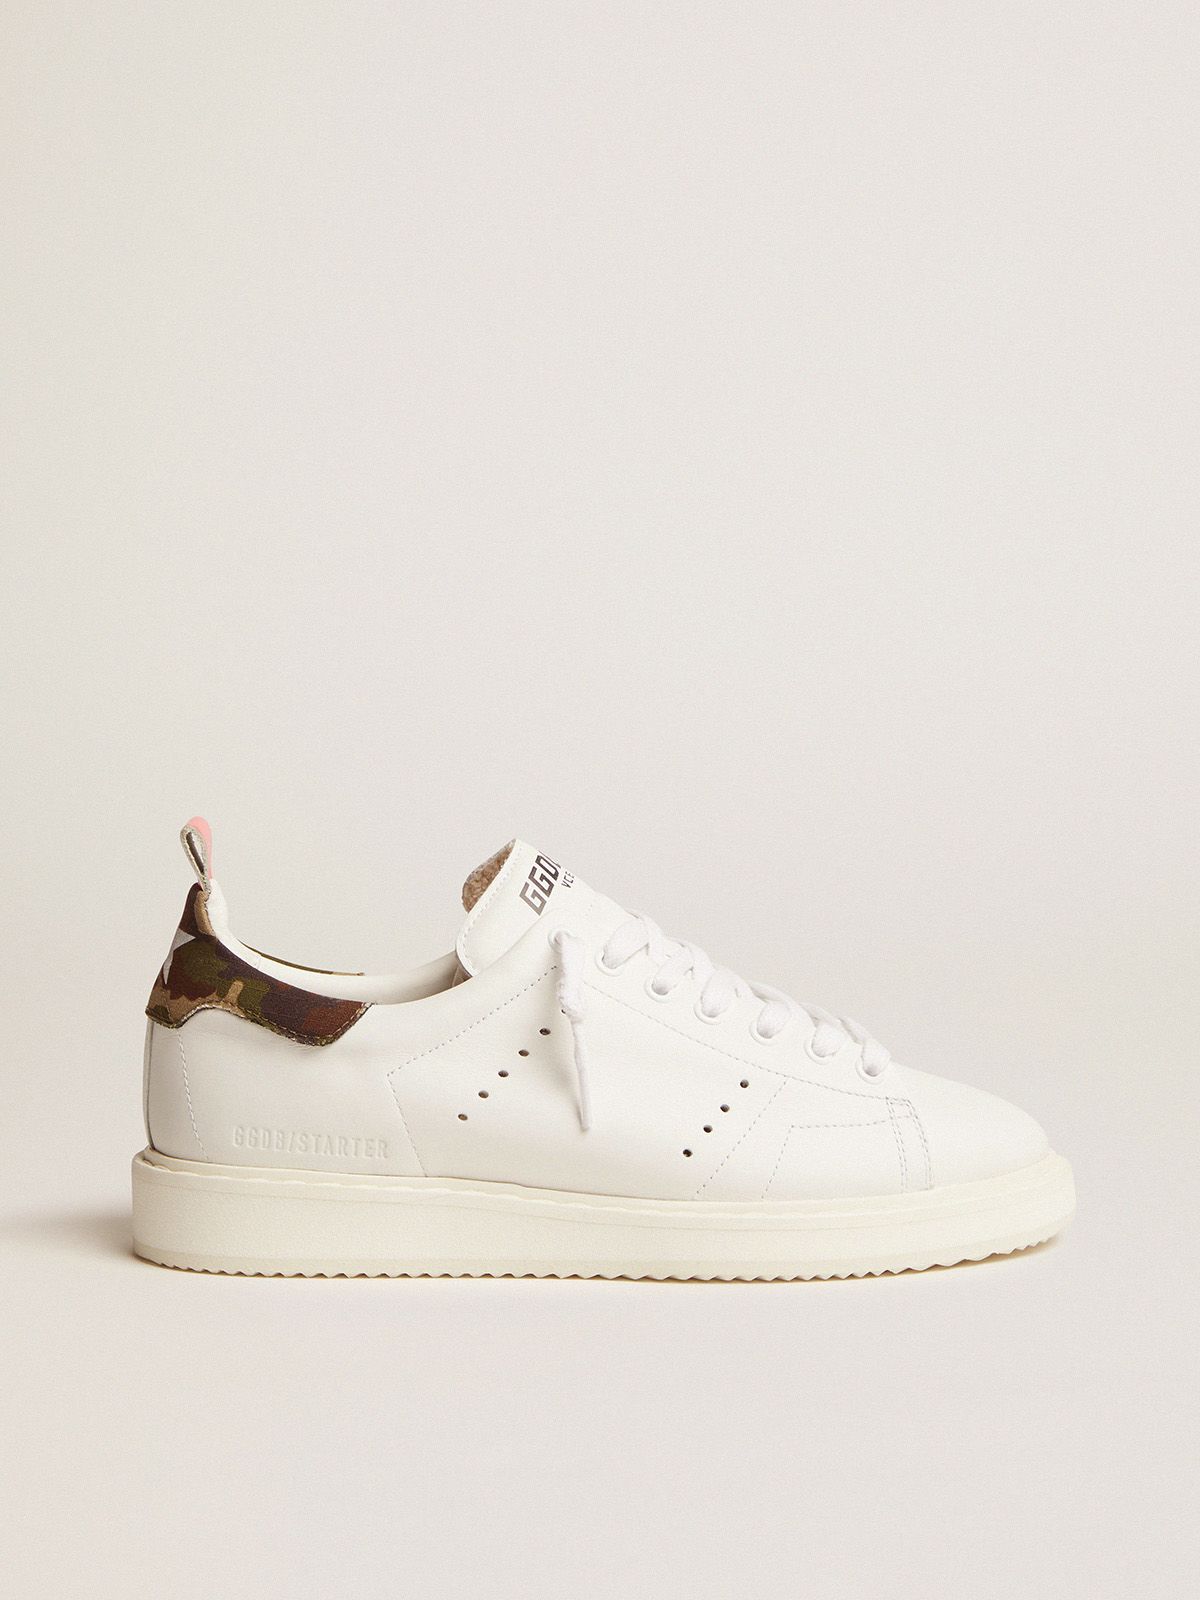 Womens new arrivals: clothing and sneakers | Golden Goose